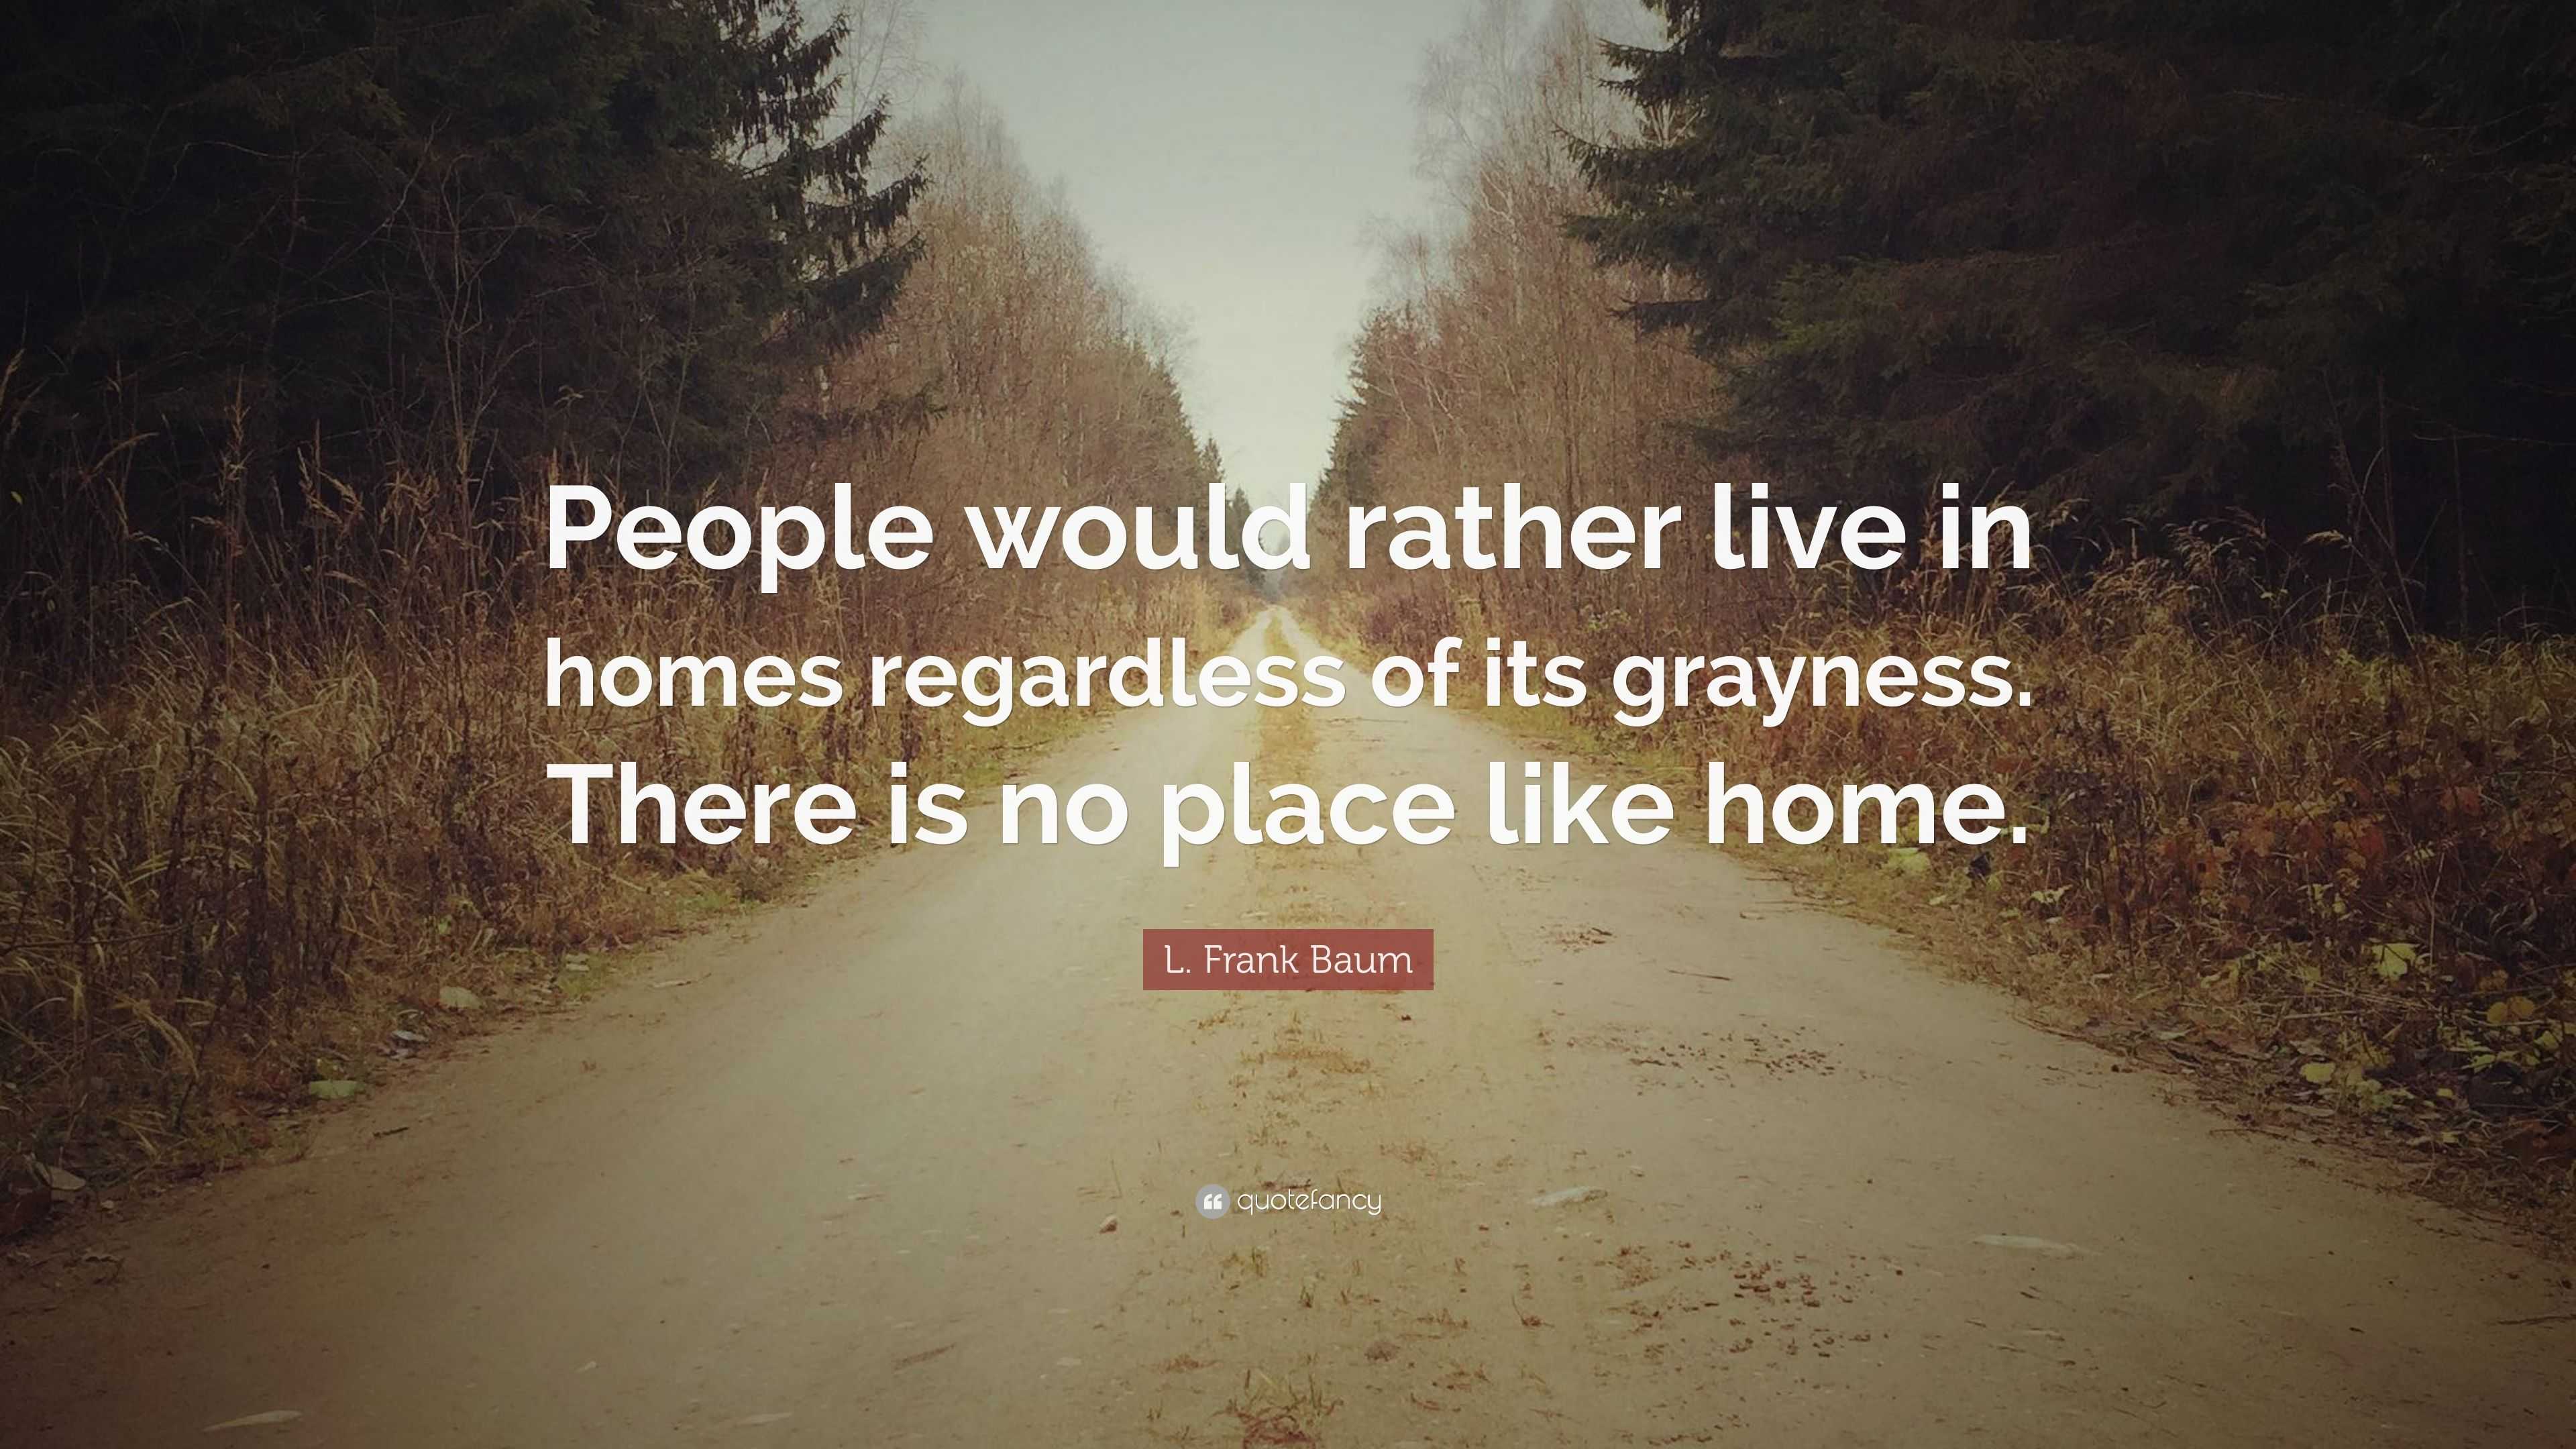 L. Frank Baum Quote: “People would rather live in homes regardless of ...
